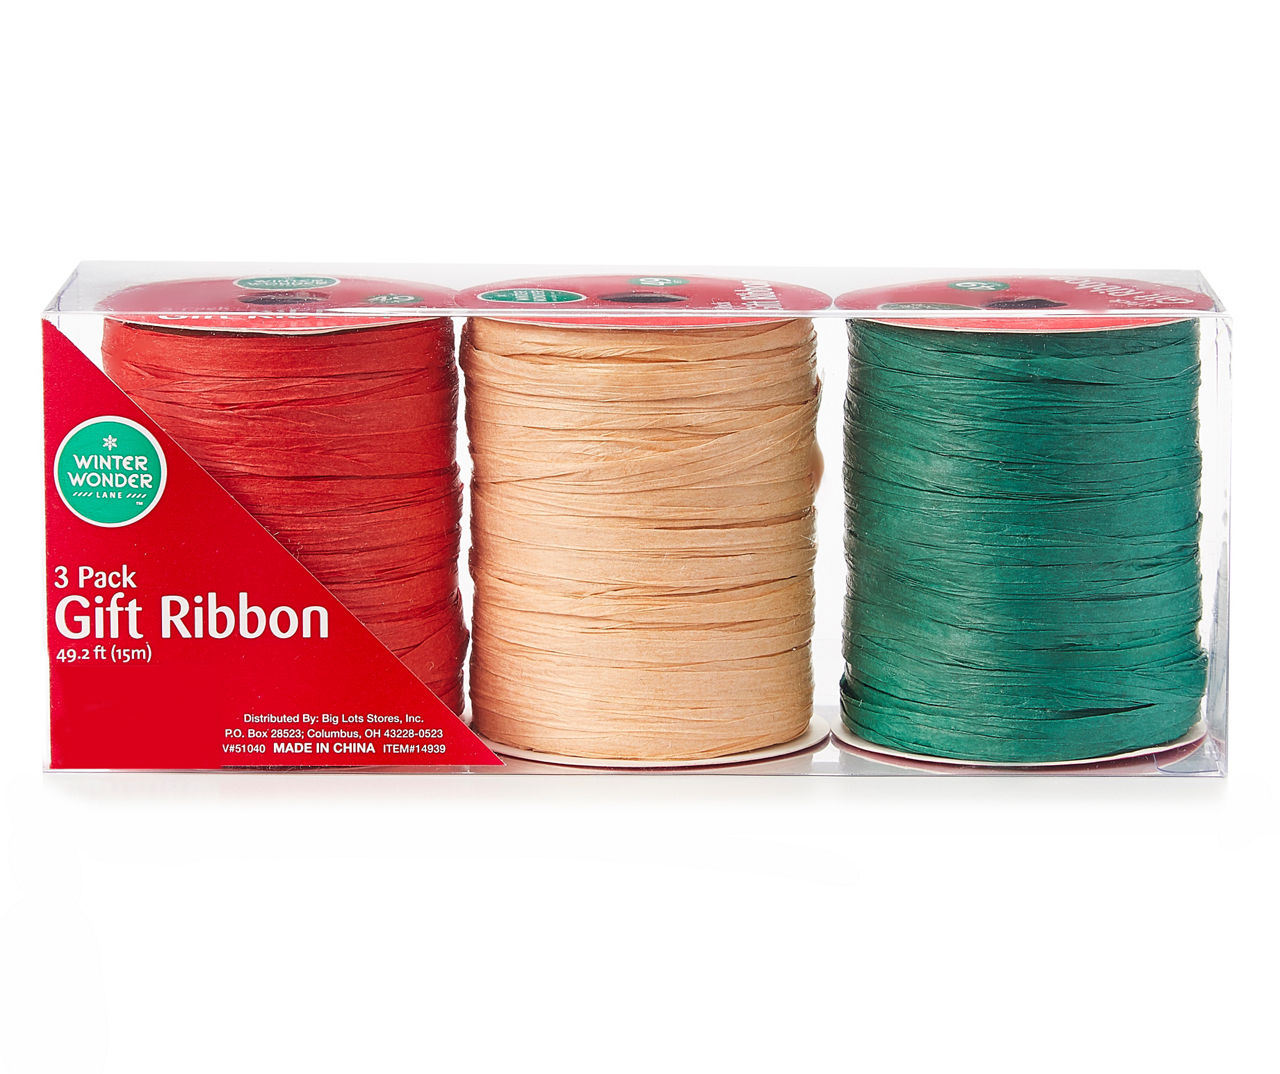 Festive Raffia Ribbon Trio - Red, Green & Khaki, 1080ft (3 x 360ft), Matte Paper  Ribbon for Christmas Crafts & Gift Wrapping 